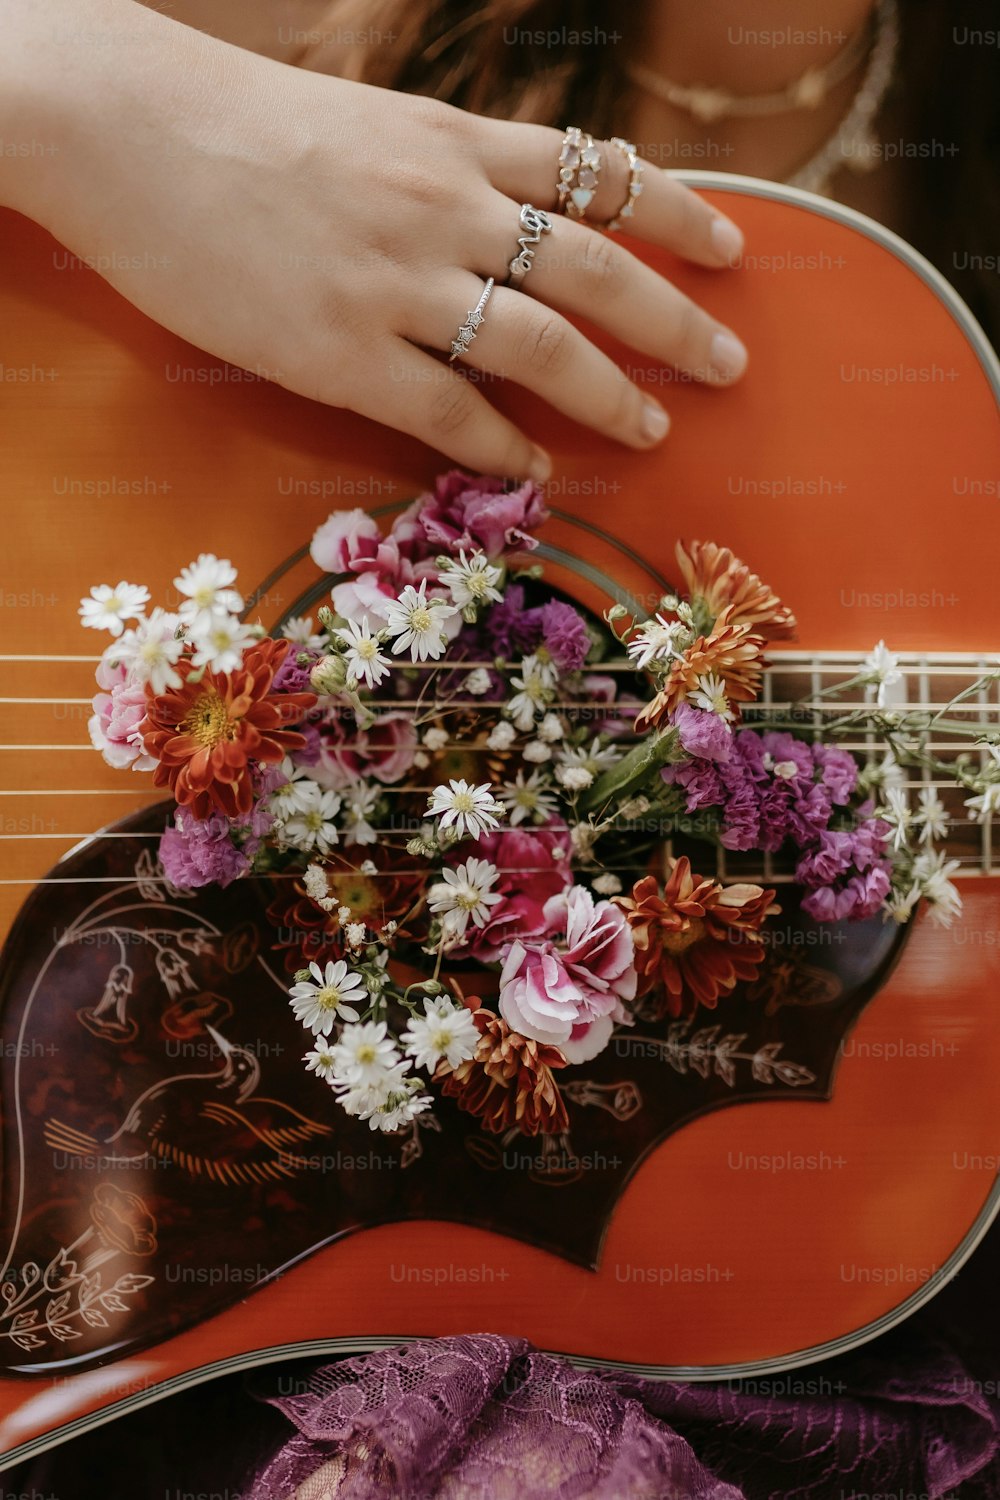 a person holding a guitar with flowers on it